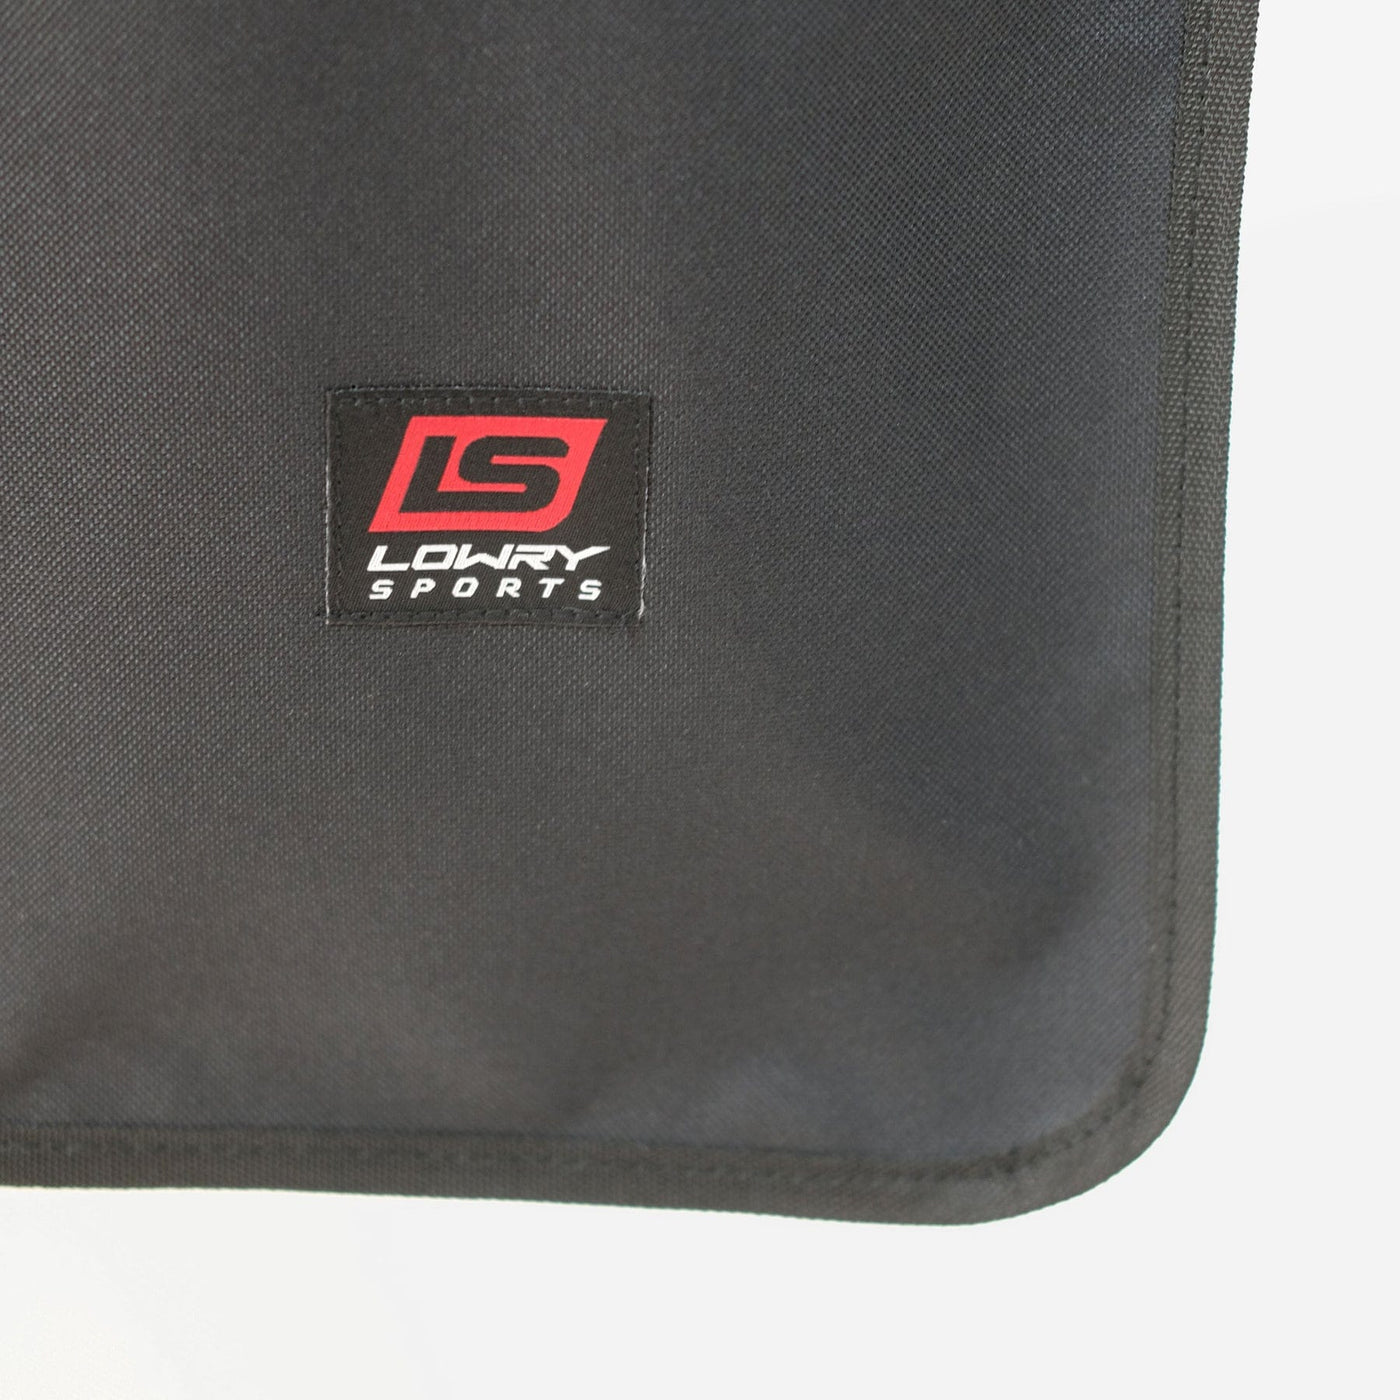 Lowry Player Garment Bag - Holds 2 Jerseys - The Hockey Shop Source For Sports